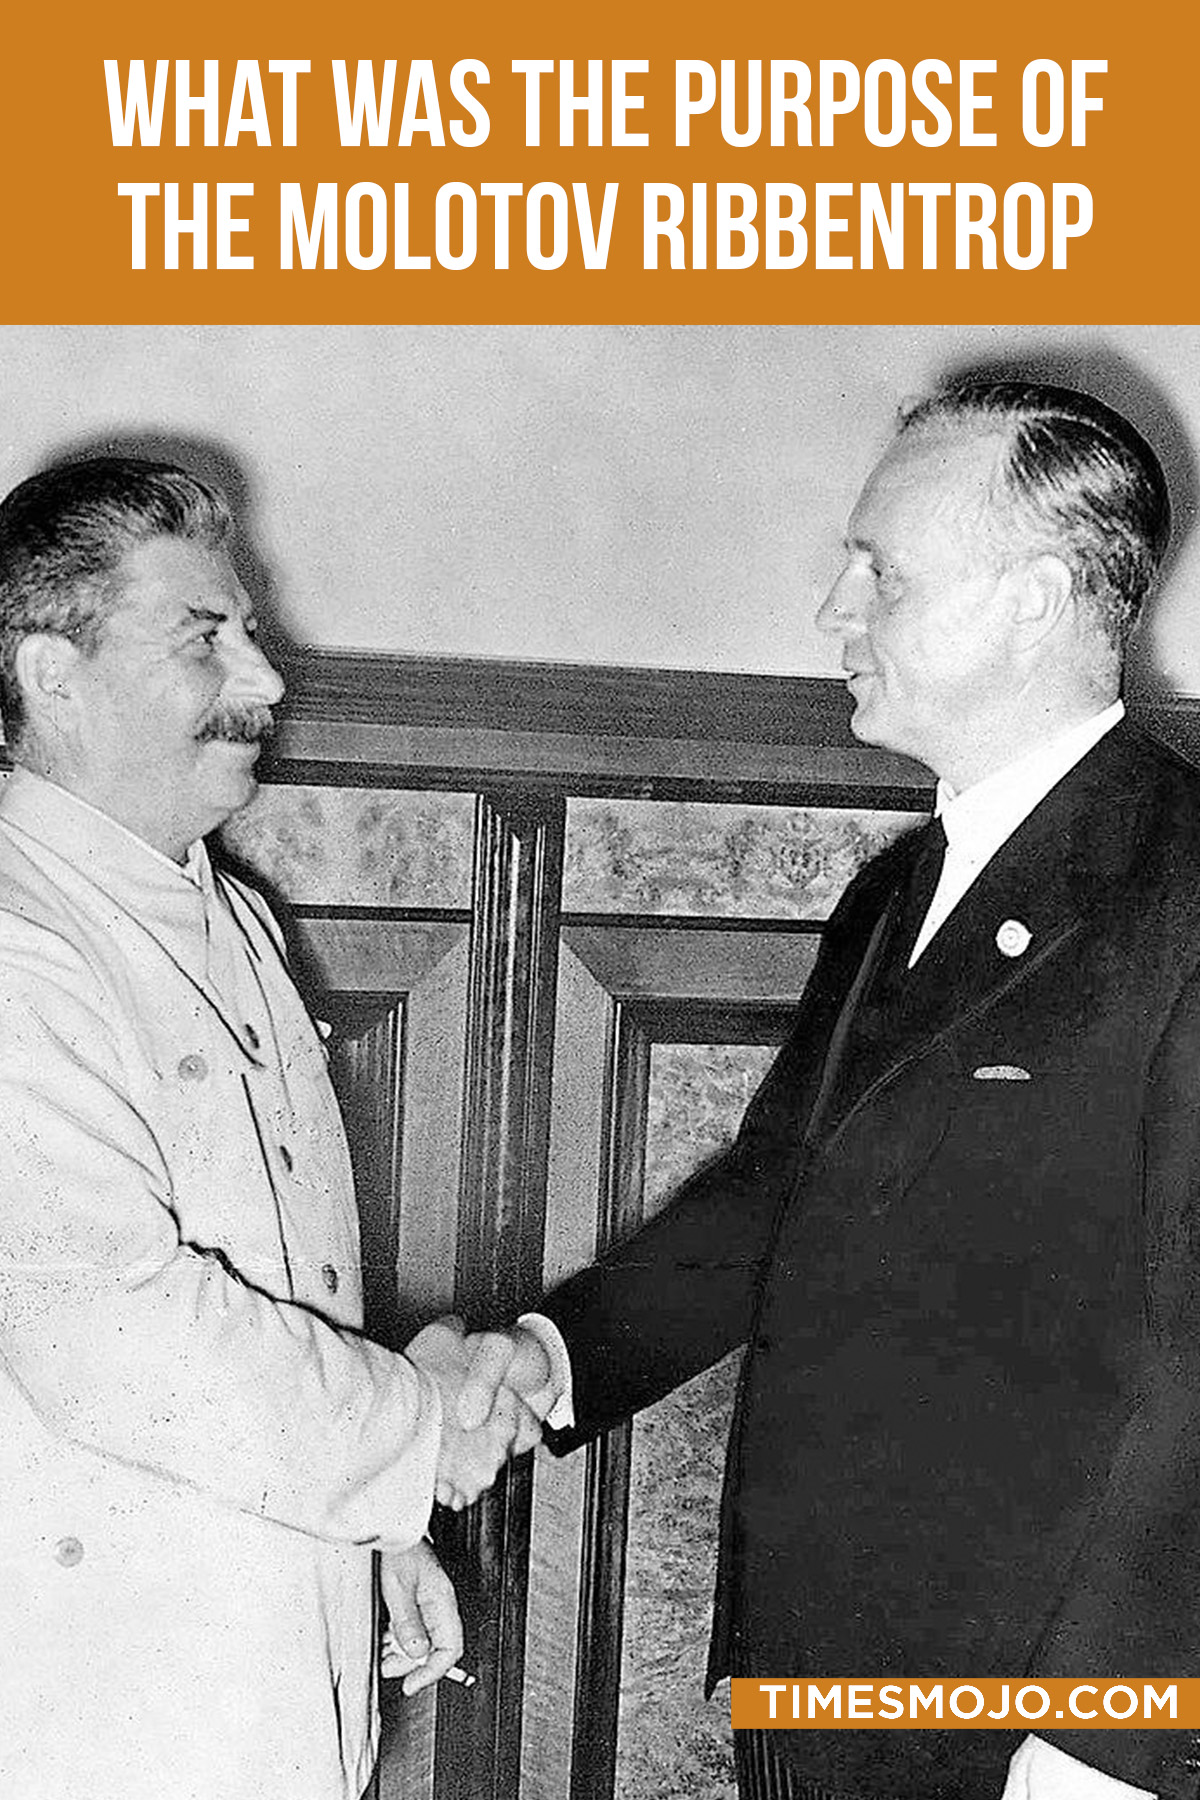 What Was The Purpose Of The Molotov Ribbentrop Pact